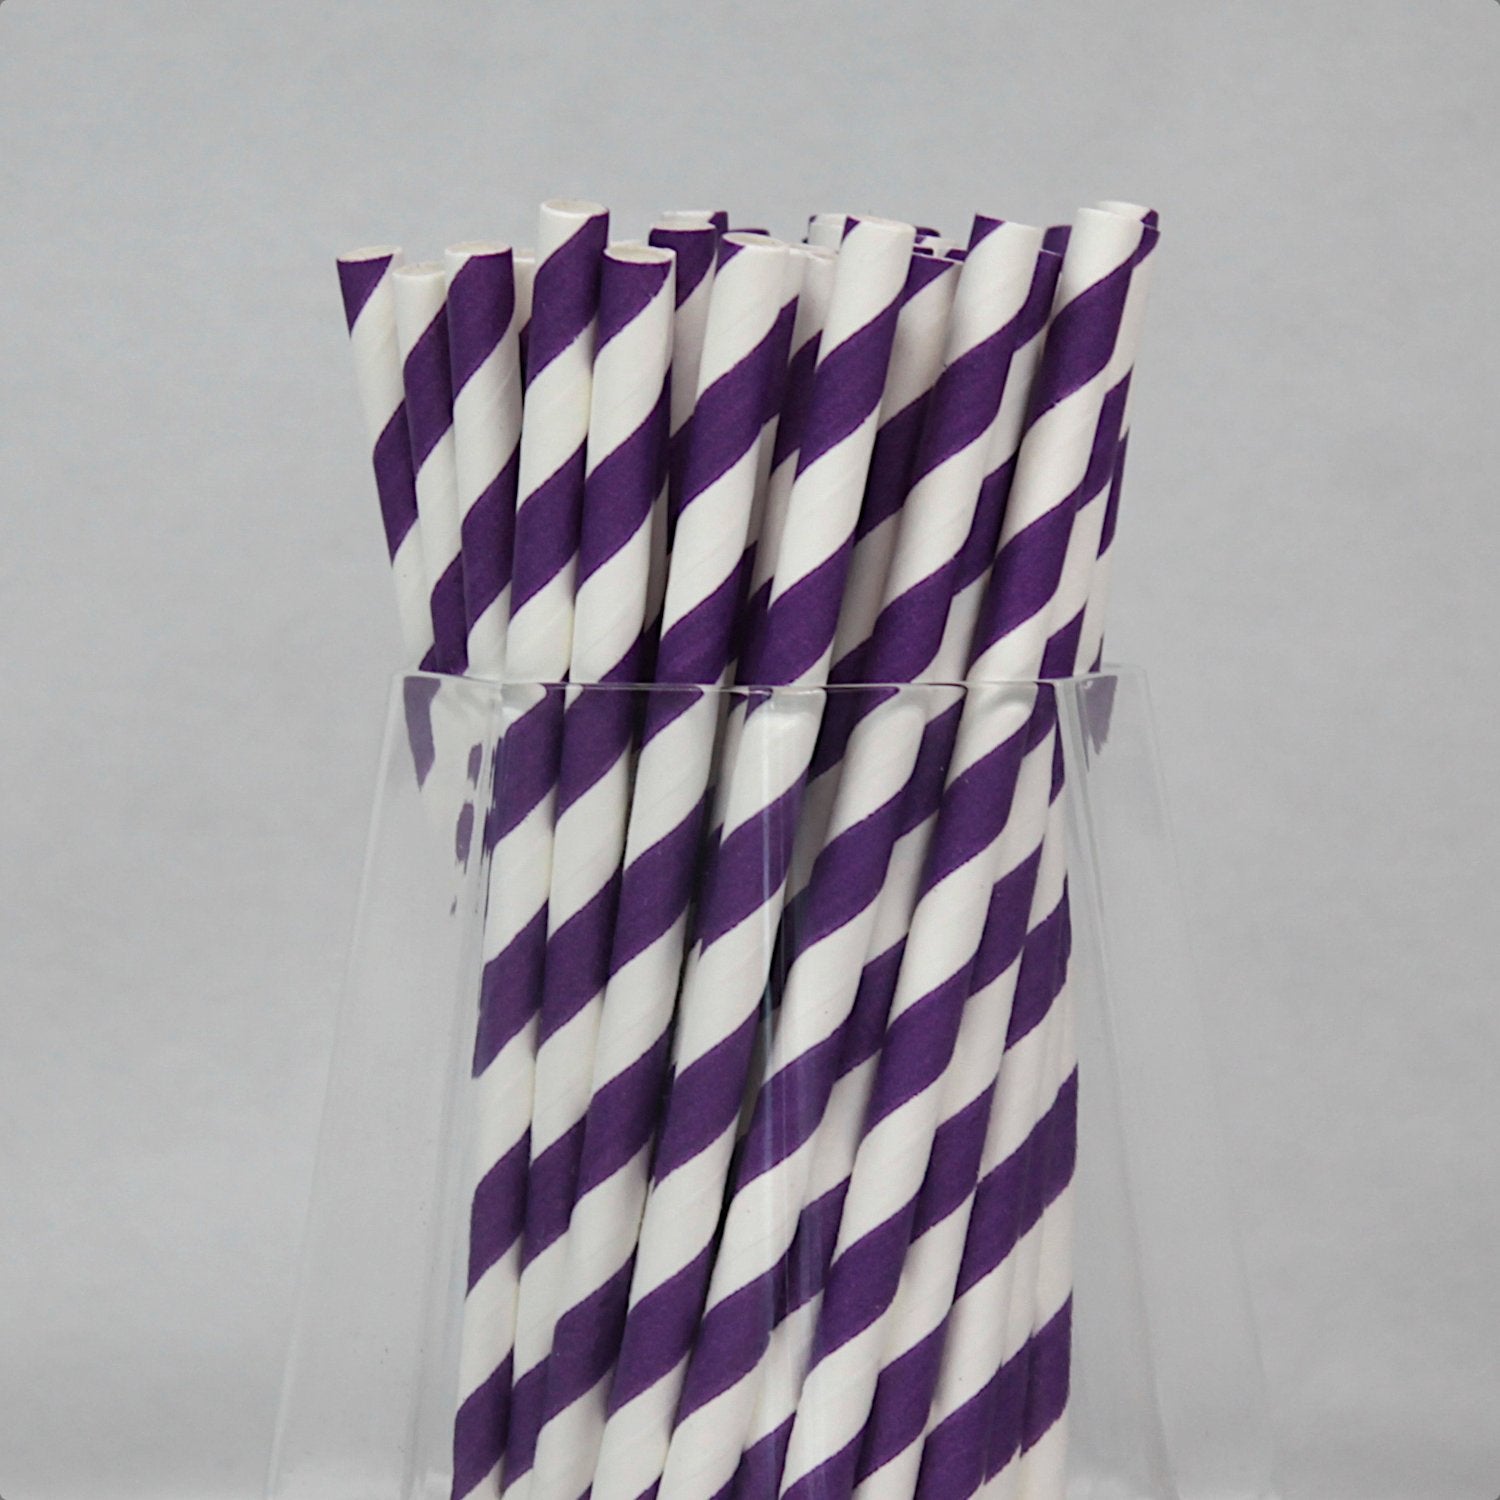 Purple & White Paper Straws (6mm x 140mm) - Quality Drinking Straws for Cocktails - Intrinsic Paper Straws